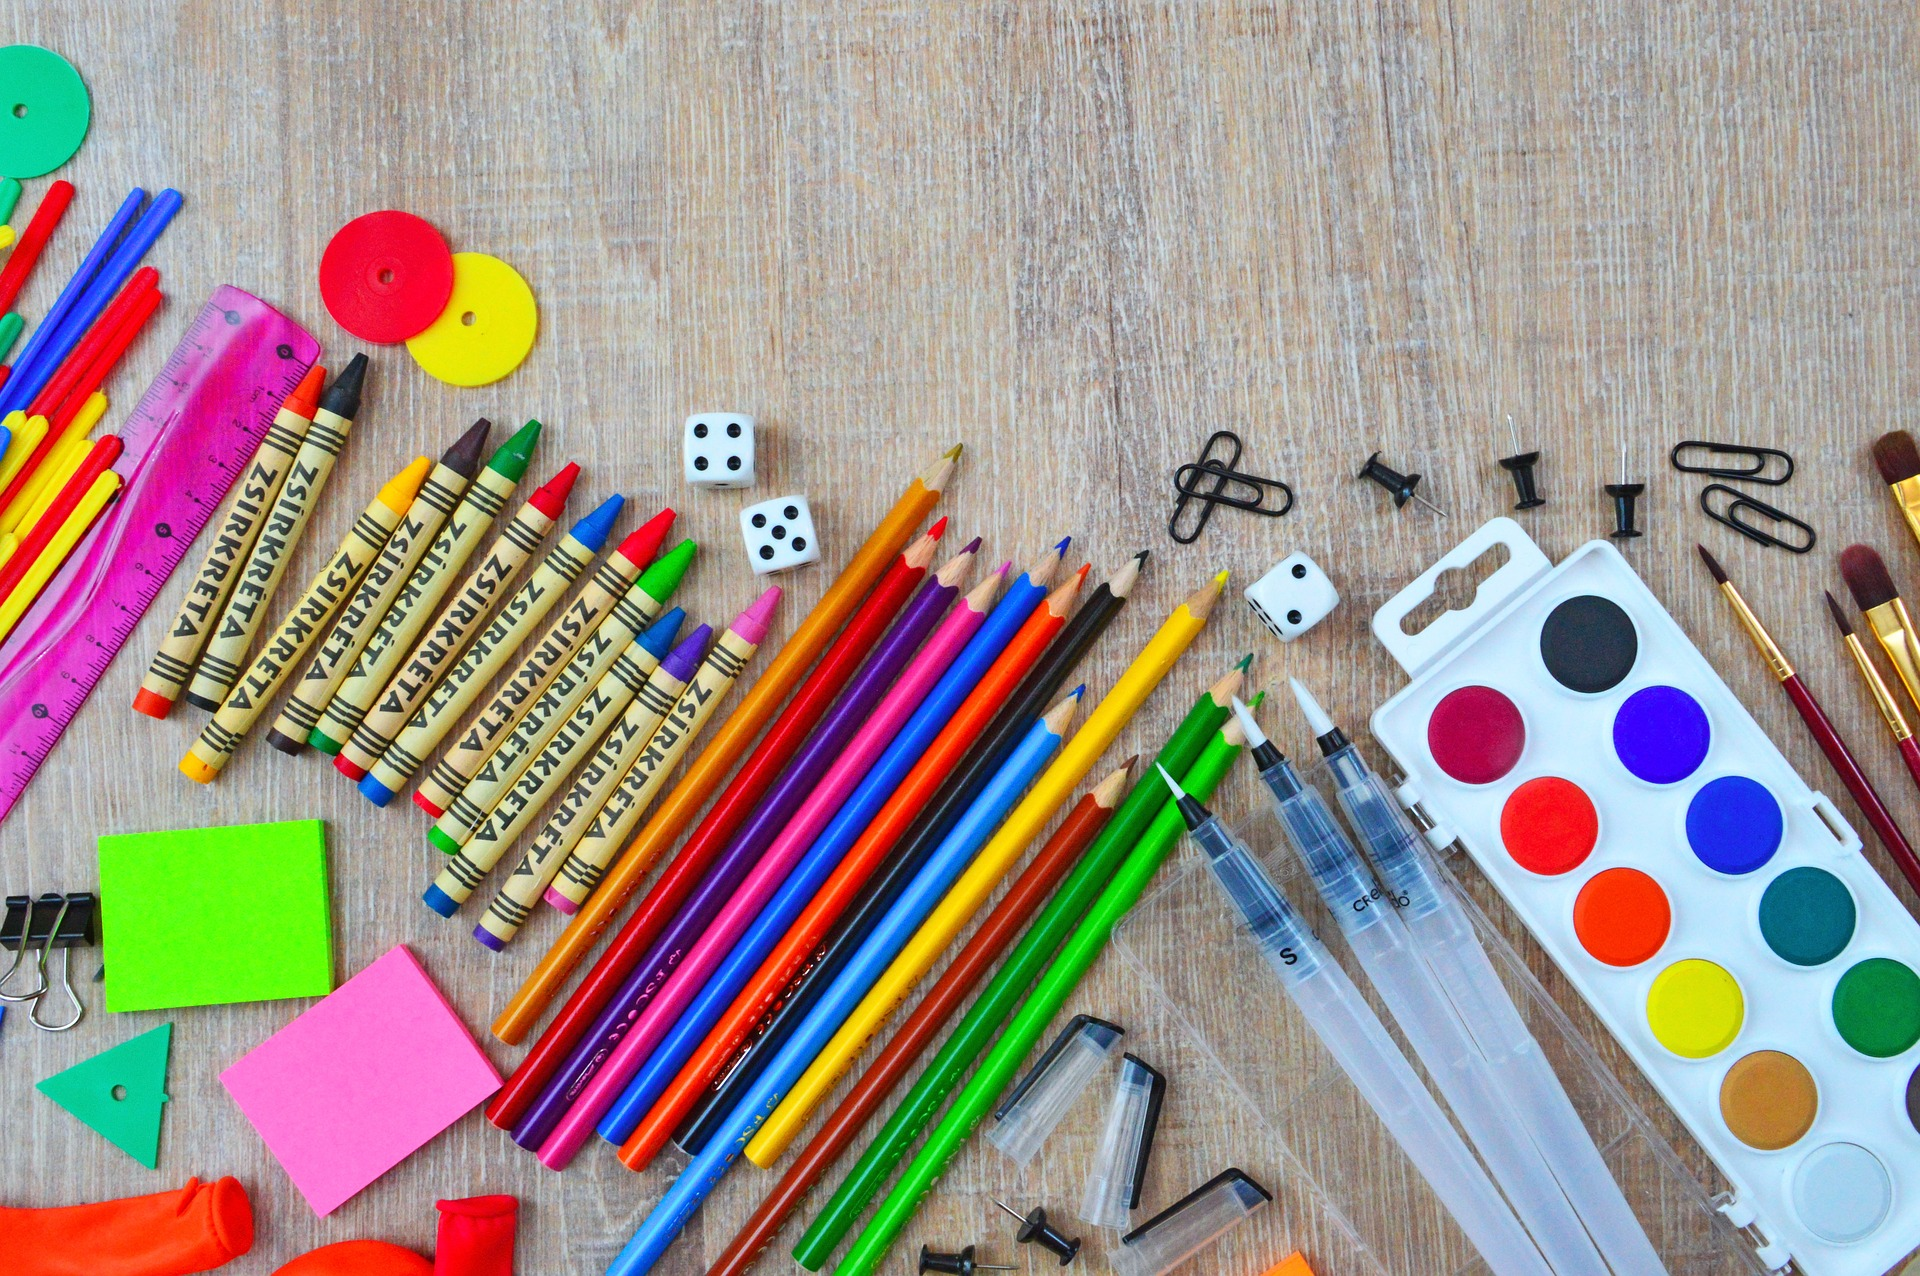 School supplies. pencils, crayons, paint, paint brushes, number cubes, sticky notes, paperclips.